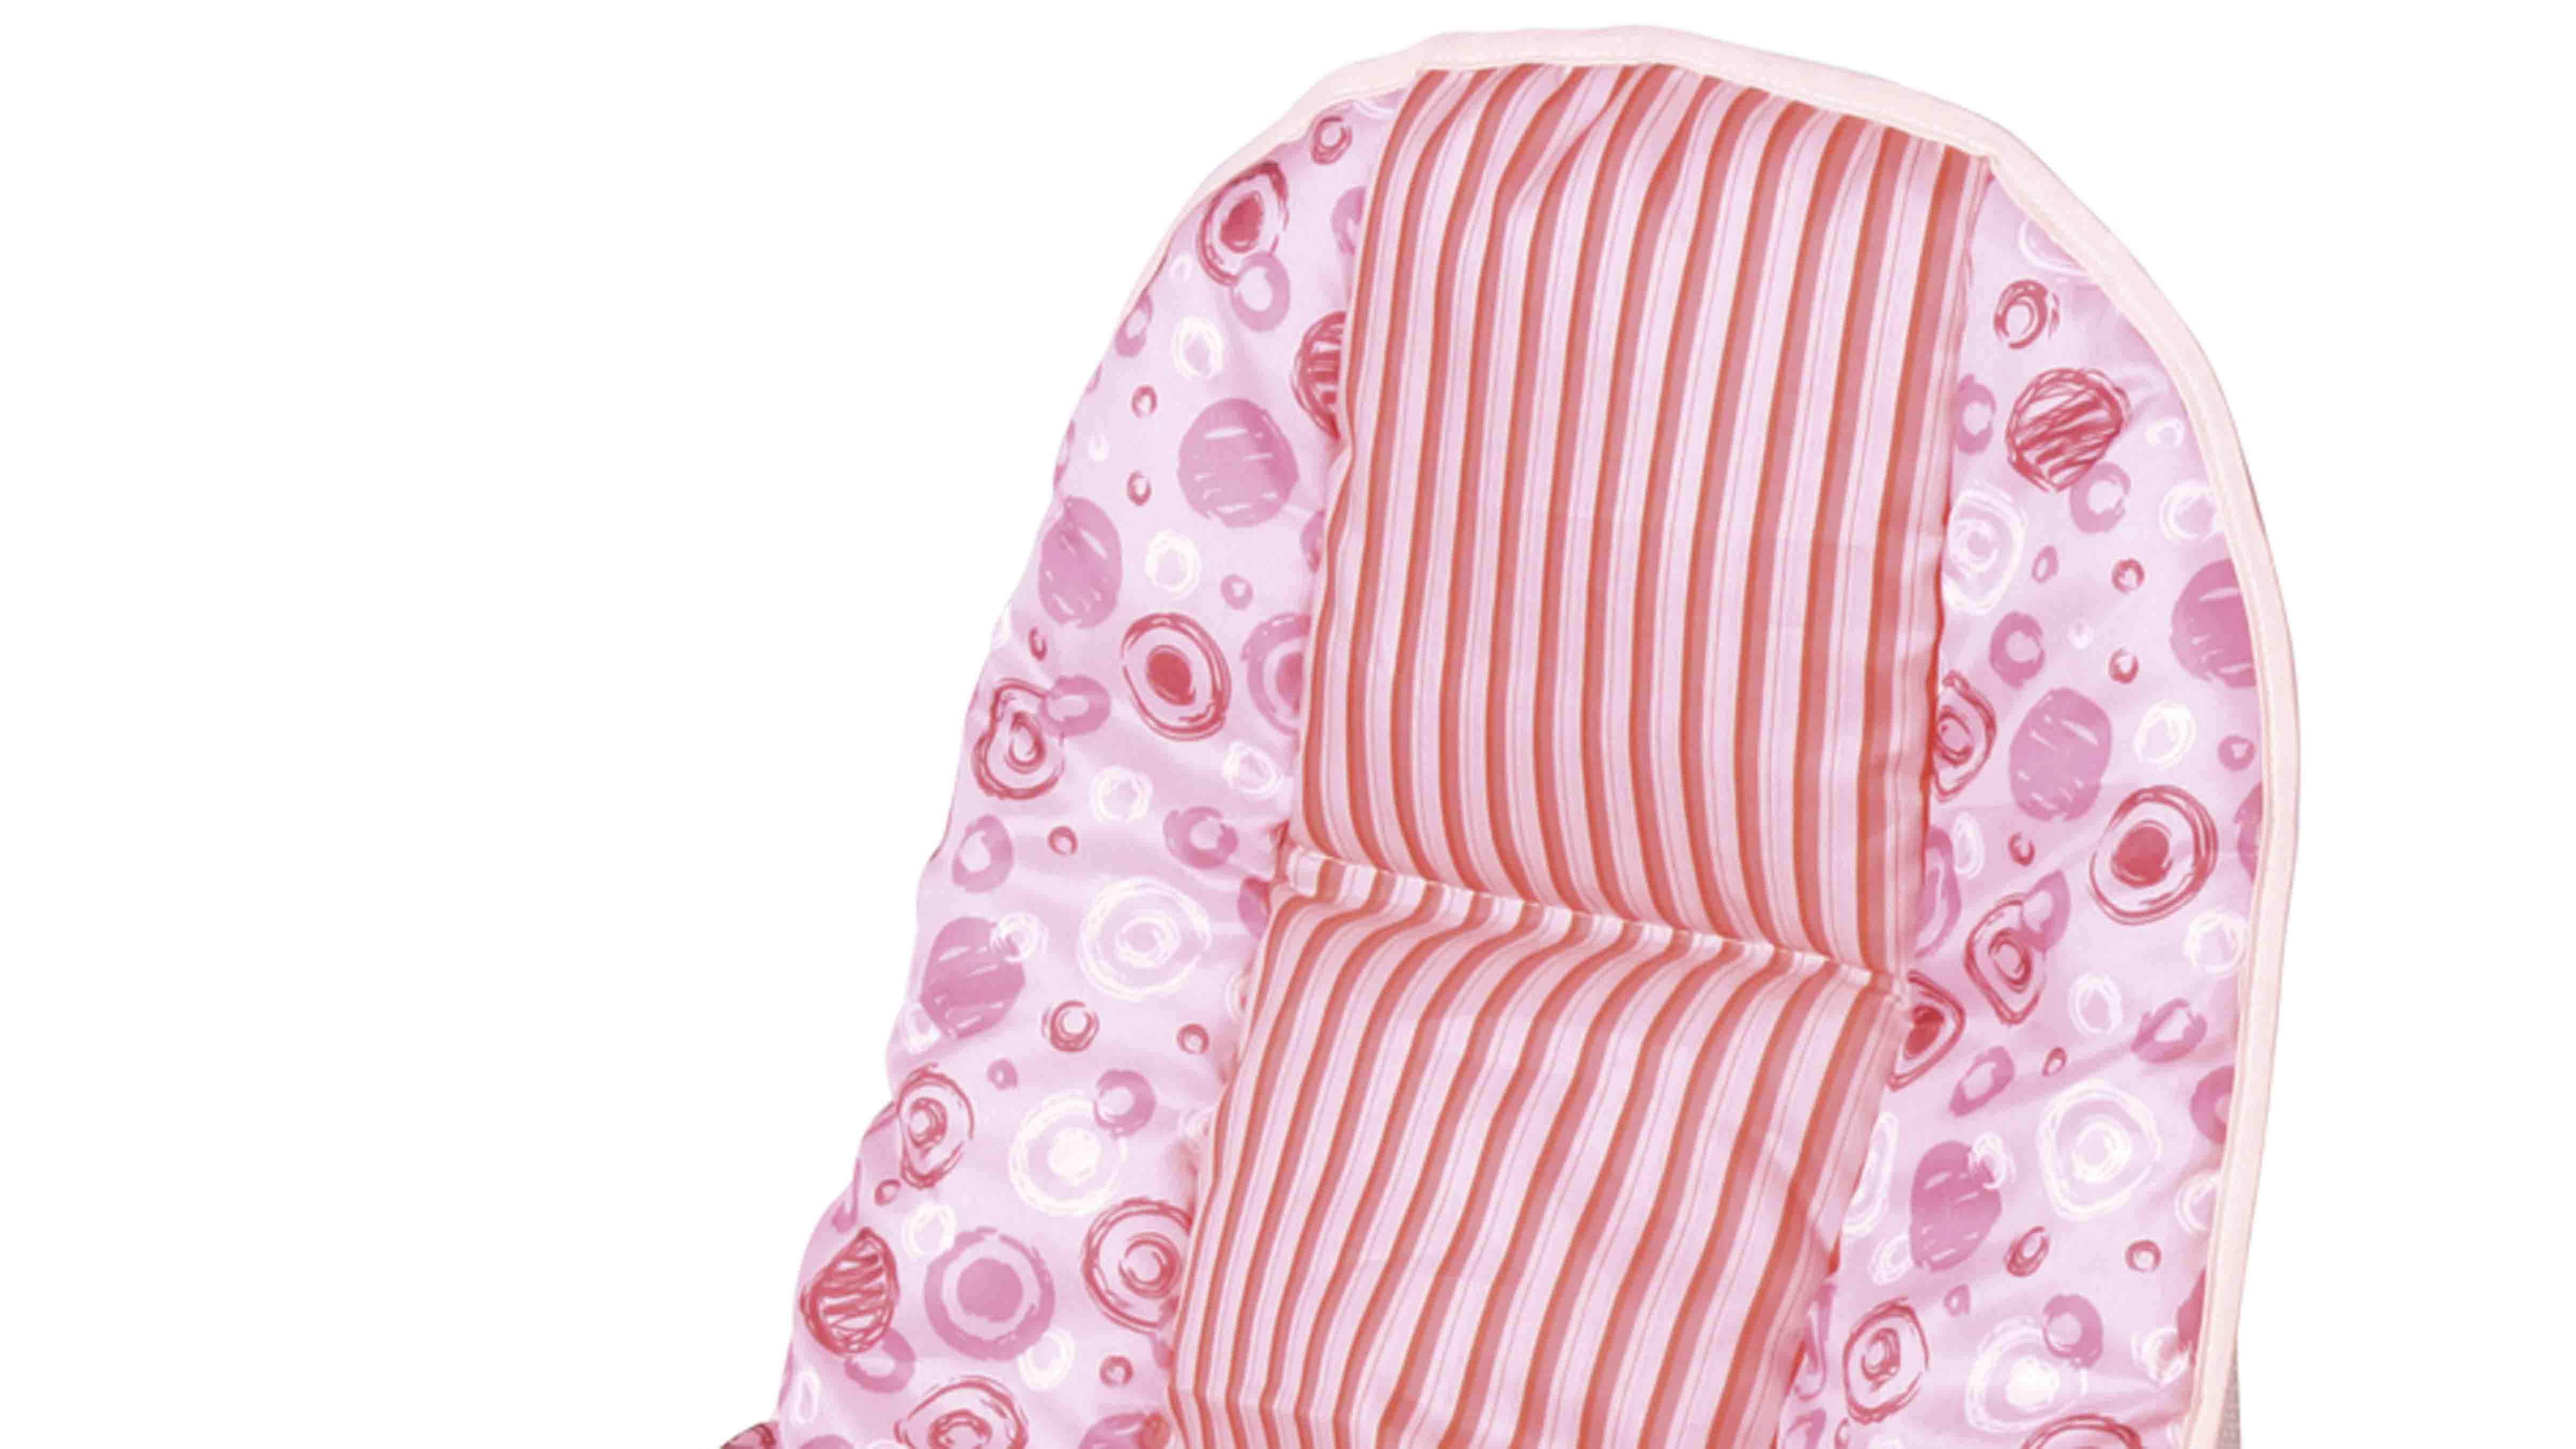 Aoqi comfortable baby bouncer price supplier for infant